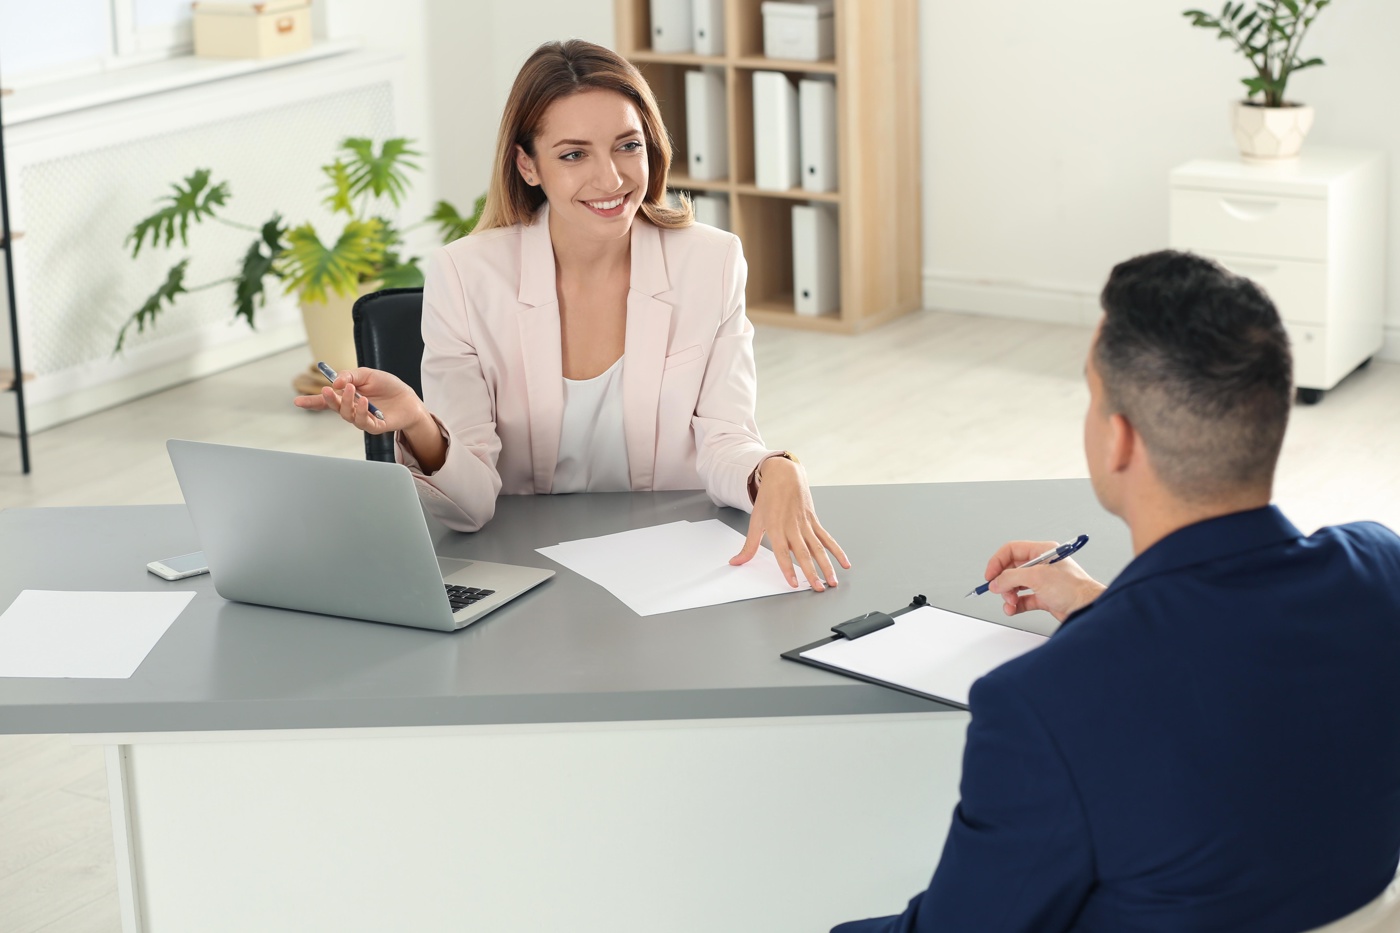 An HR manager with a federal diploma conducts an appraisal interview (MAG).